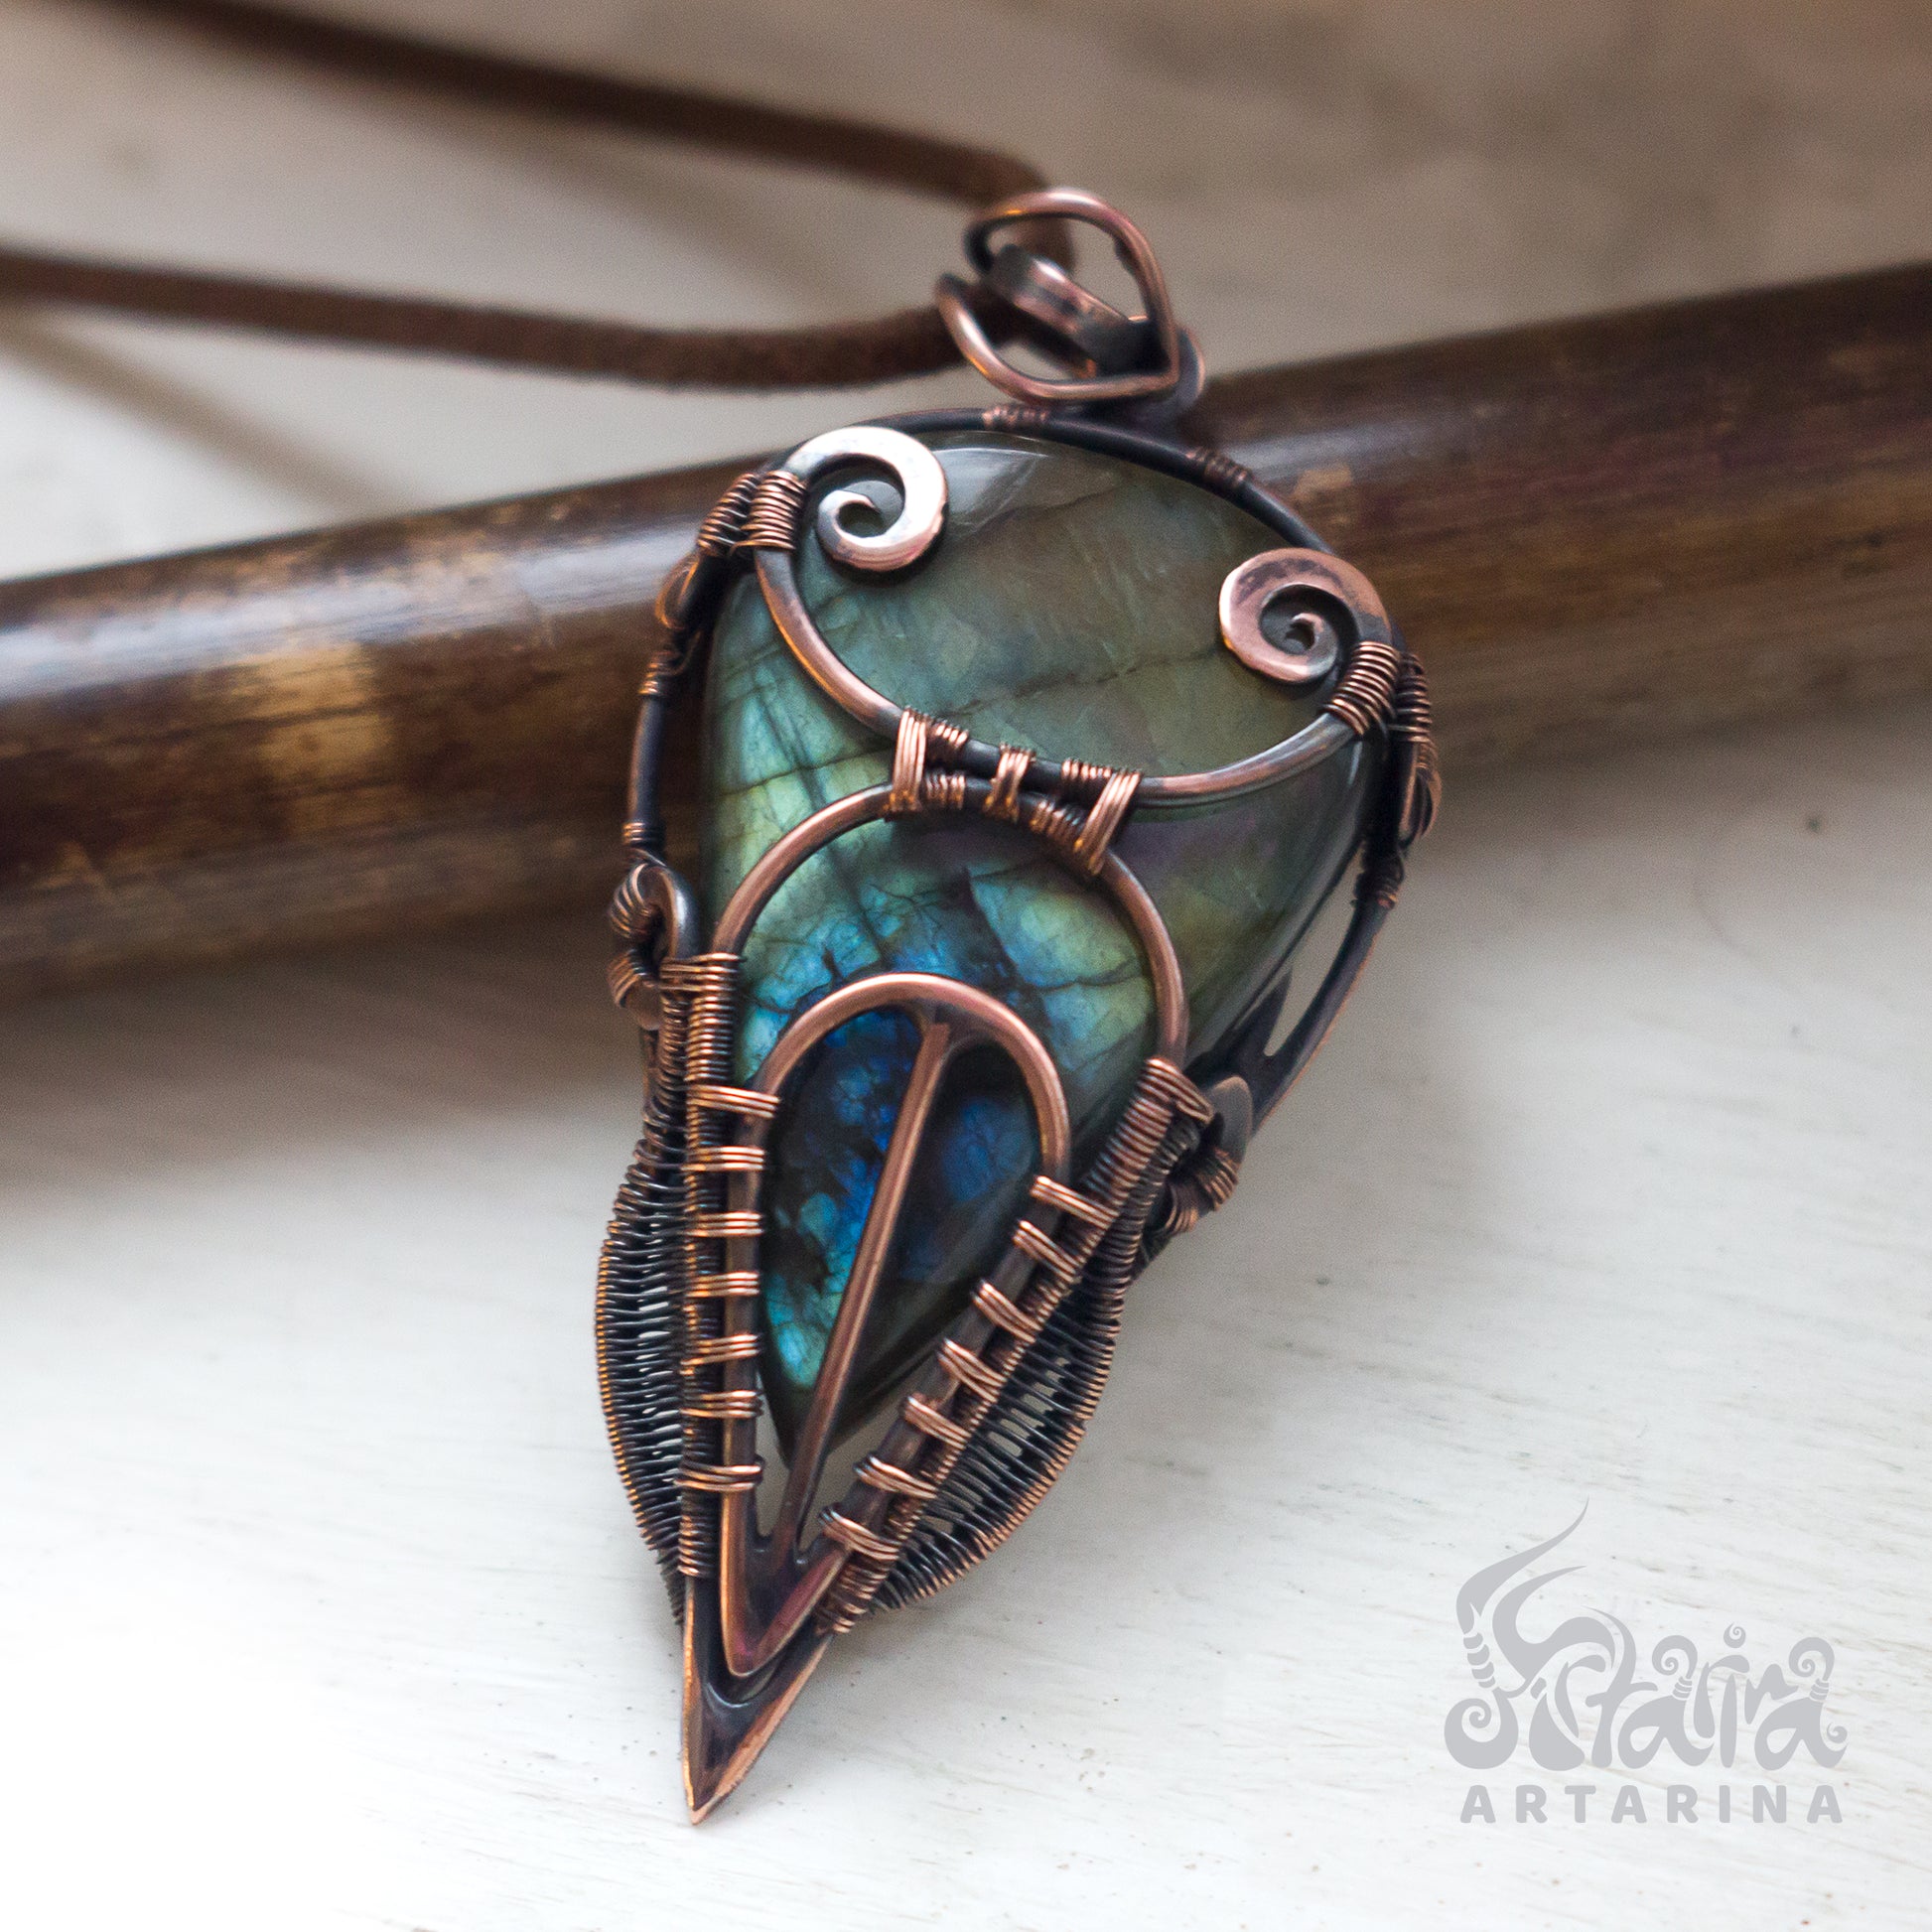 Large copper pendant with stunning labradorite stone, handcrafted for distinctive style and cosmic radiance - a unique accessory for bold individual expression pic 2